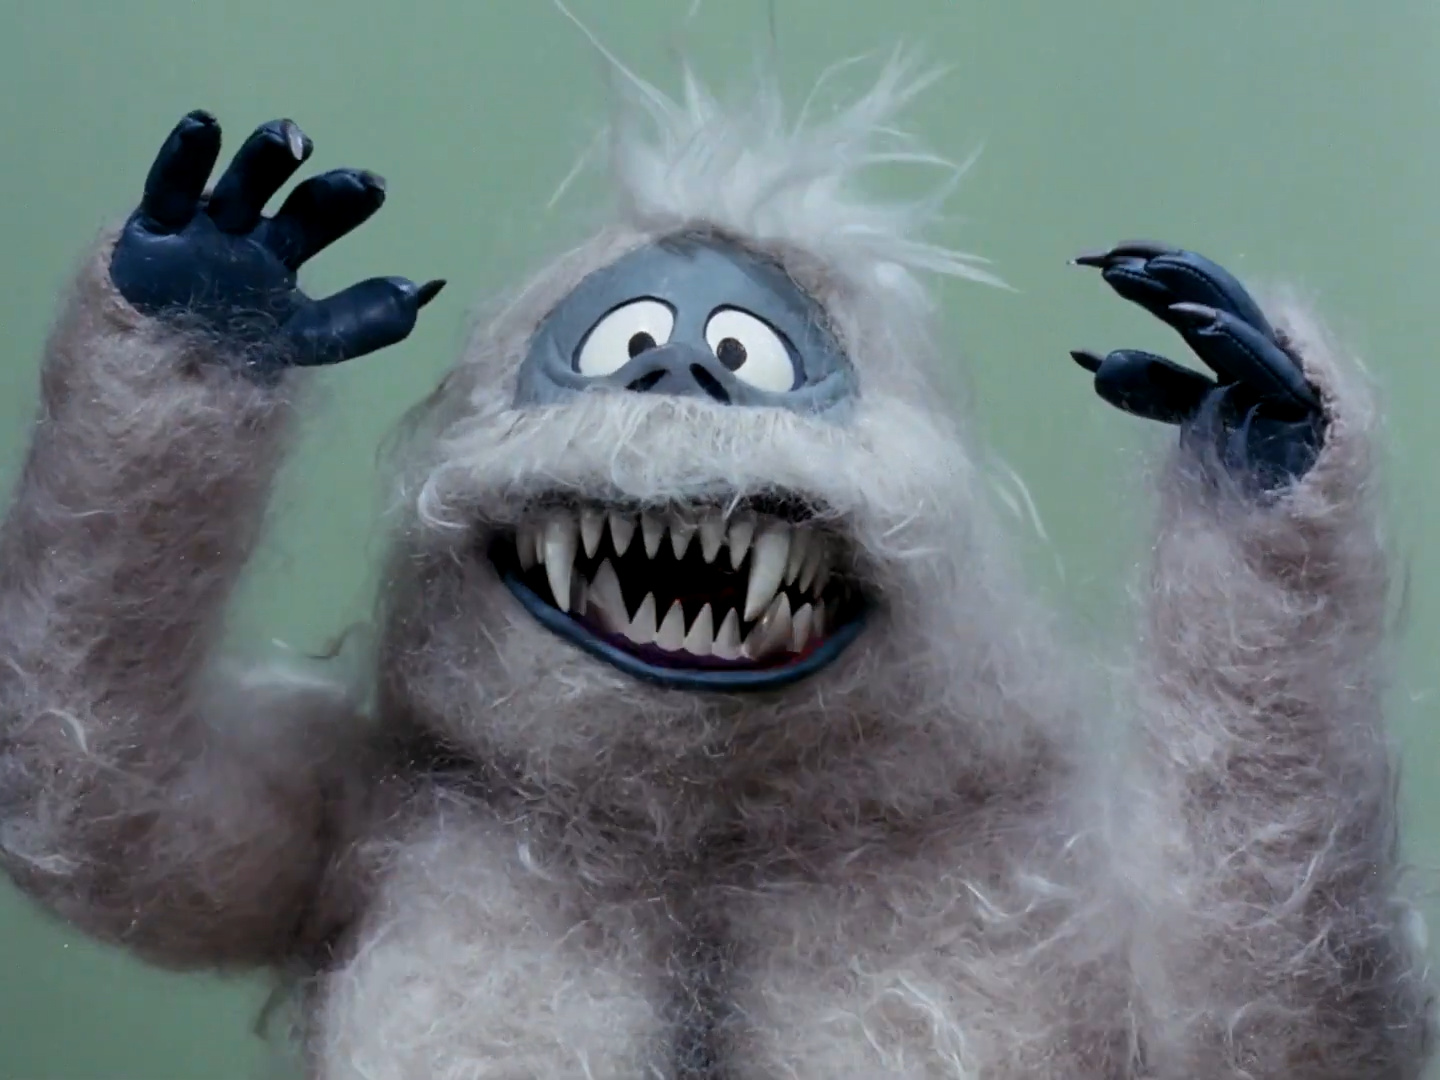 The Abominable Snowman Chomping Jaws Minecraft Skin. 